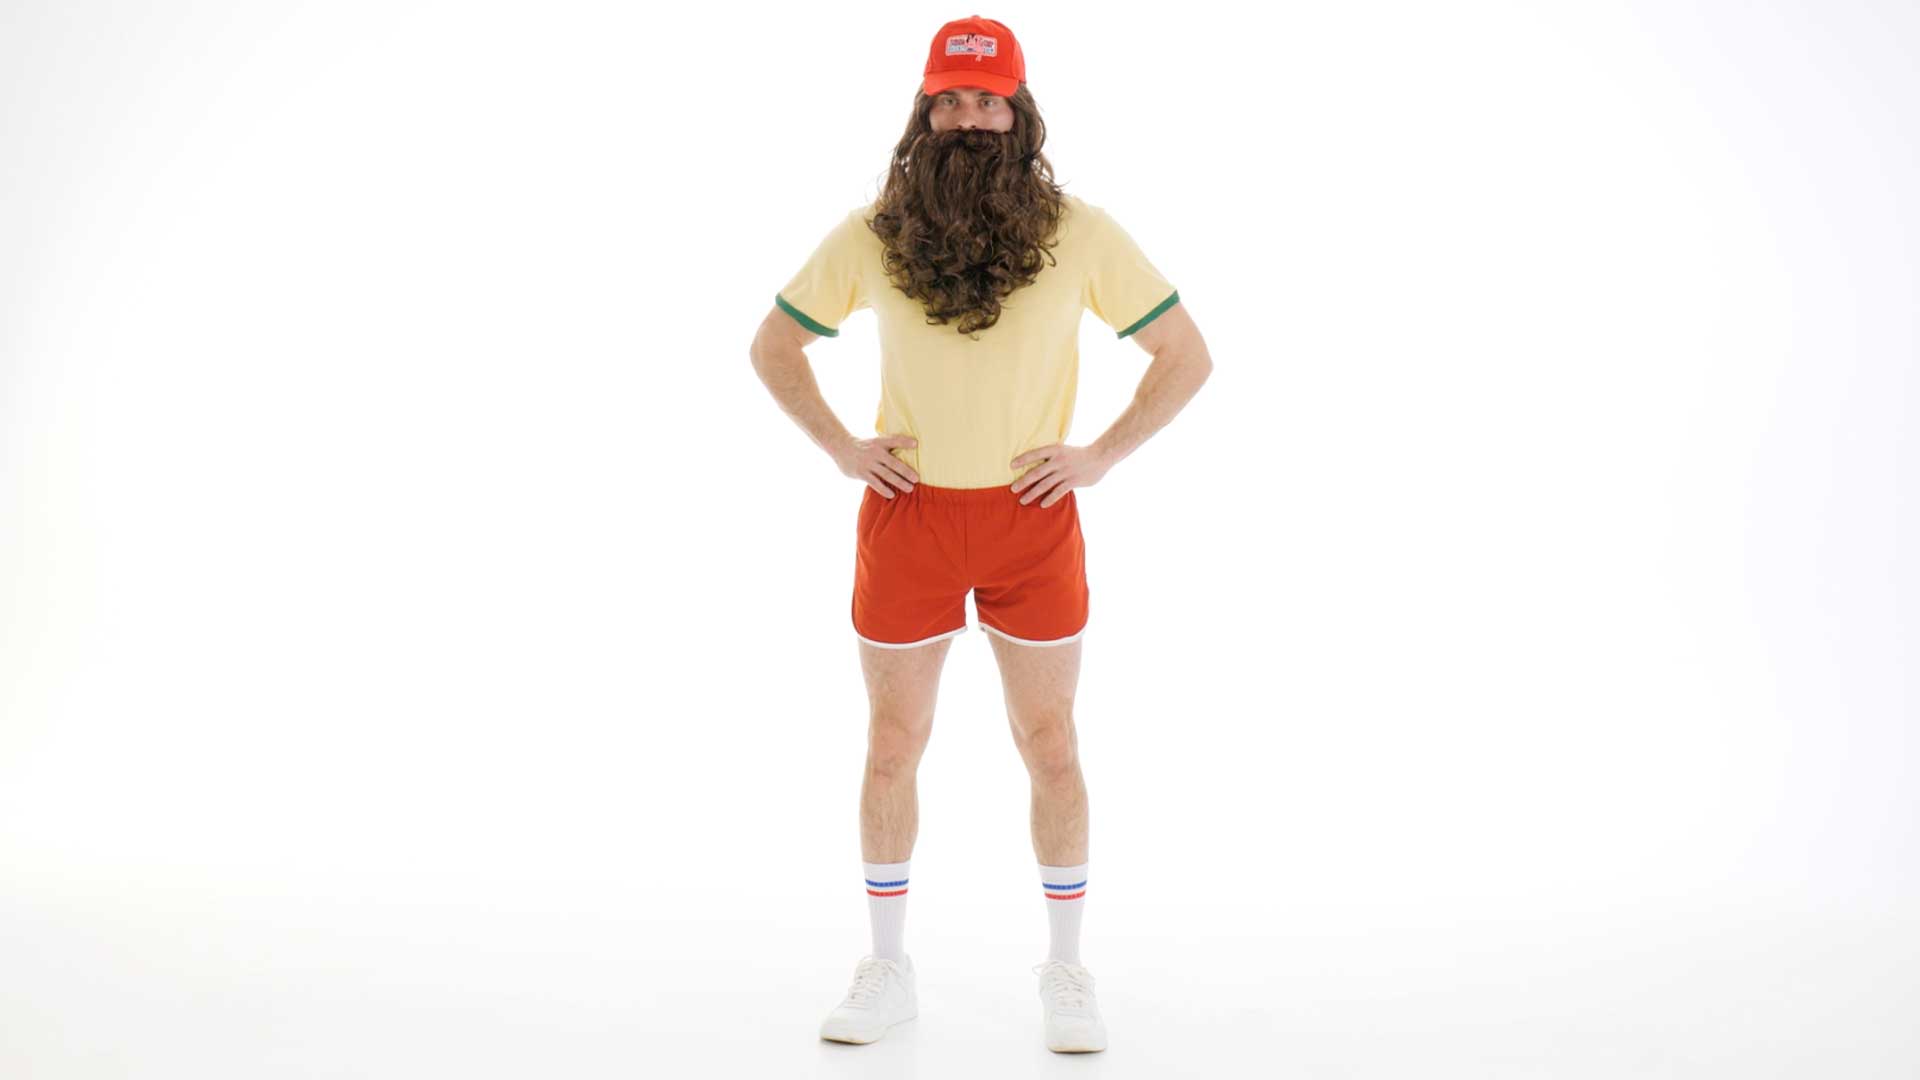 Remember when Forrest decided to go running and just never stopped? This exclusive Running Forrest Gump Costume captures that scene perfectly!